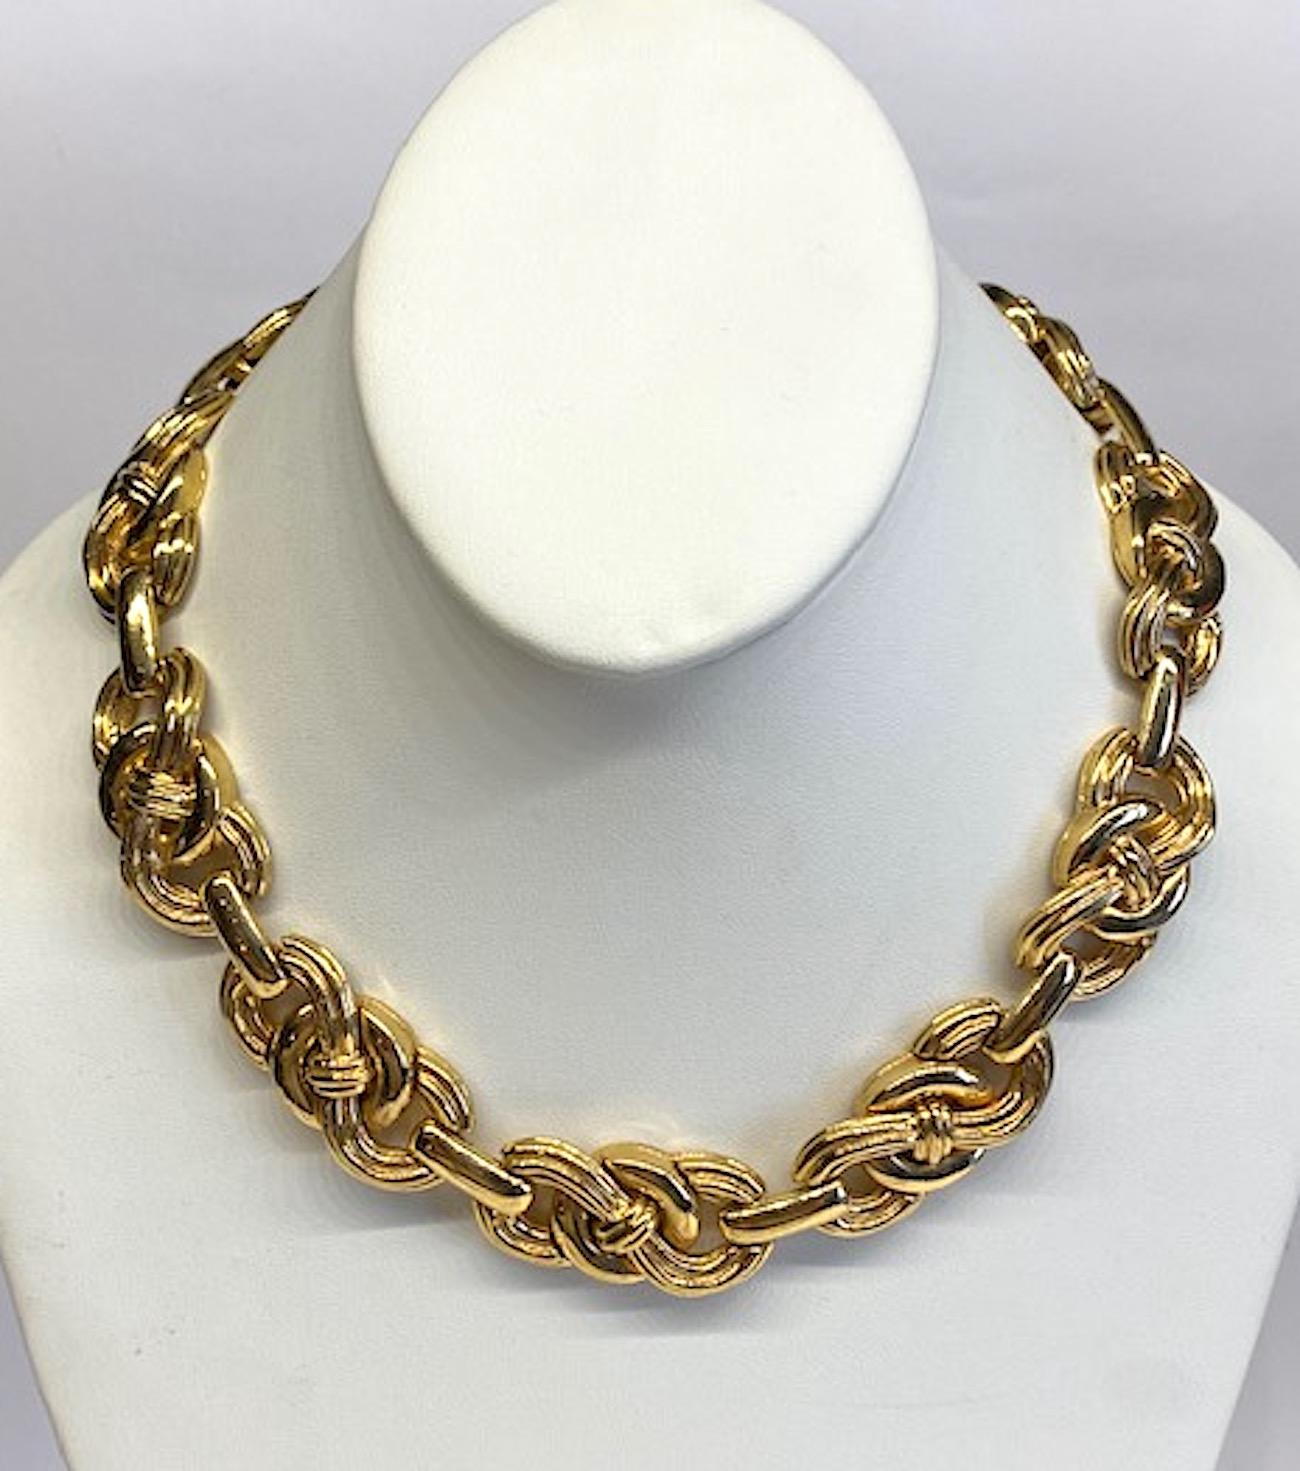 Givenchy 1980s necklace in gold tone links. Triple smooth and ribbed loop links are connected to create this beautiful classic chain necklace. The nine loop links are .75 of an inch wide and 1.63 inches long. The extender chain is 2.5 inches long